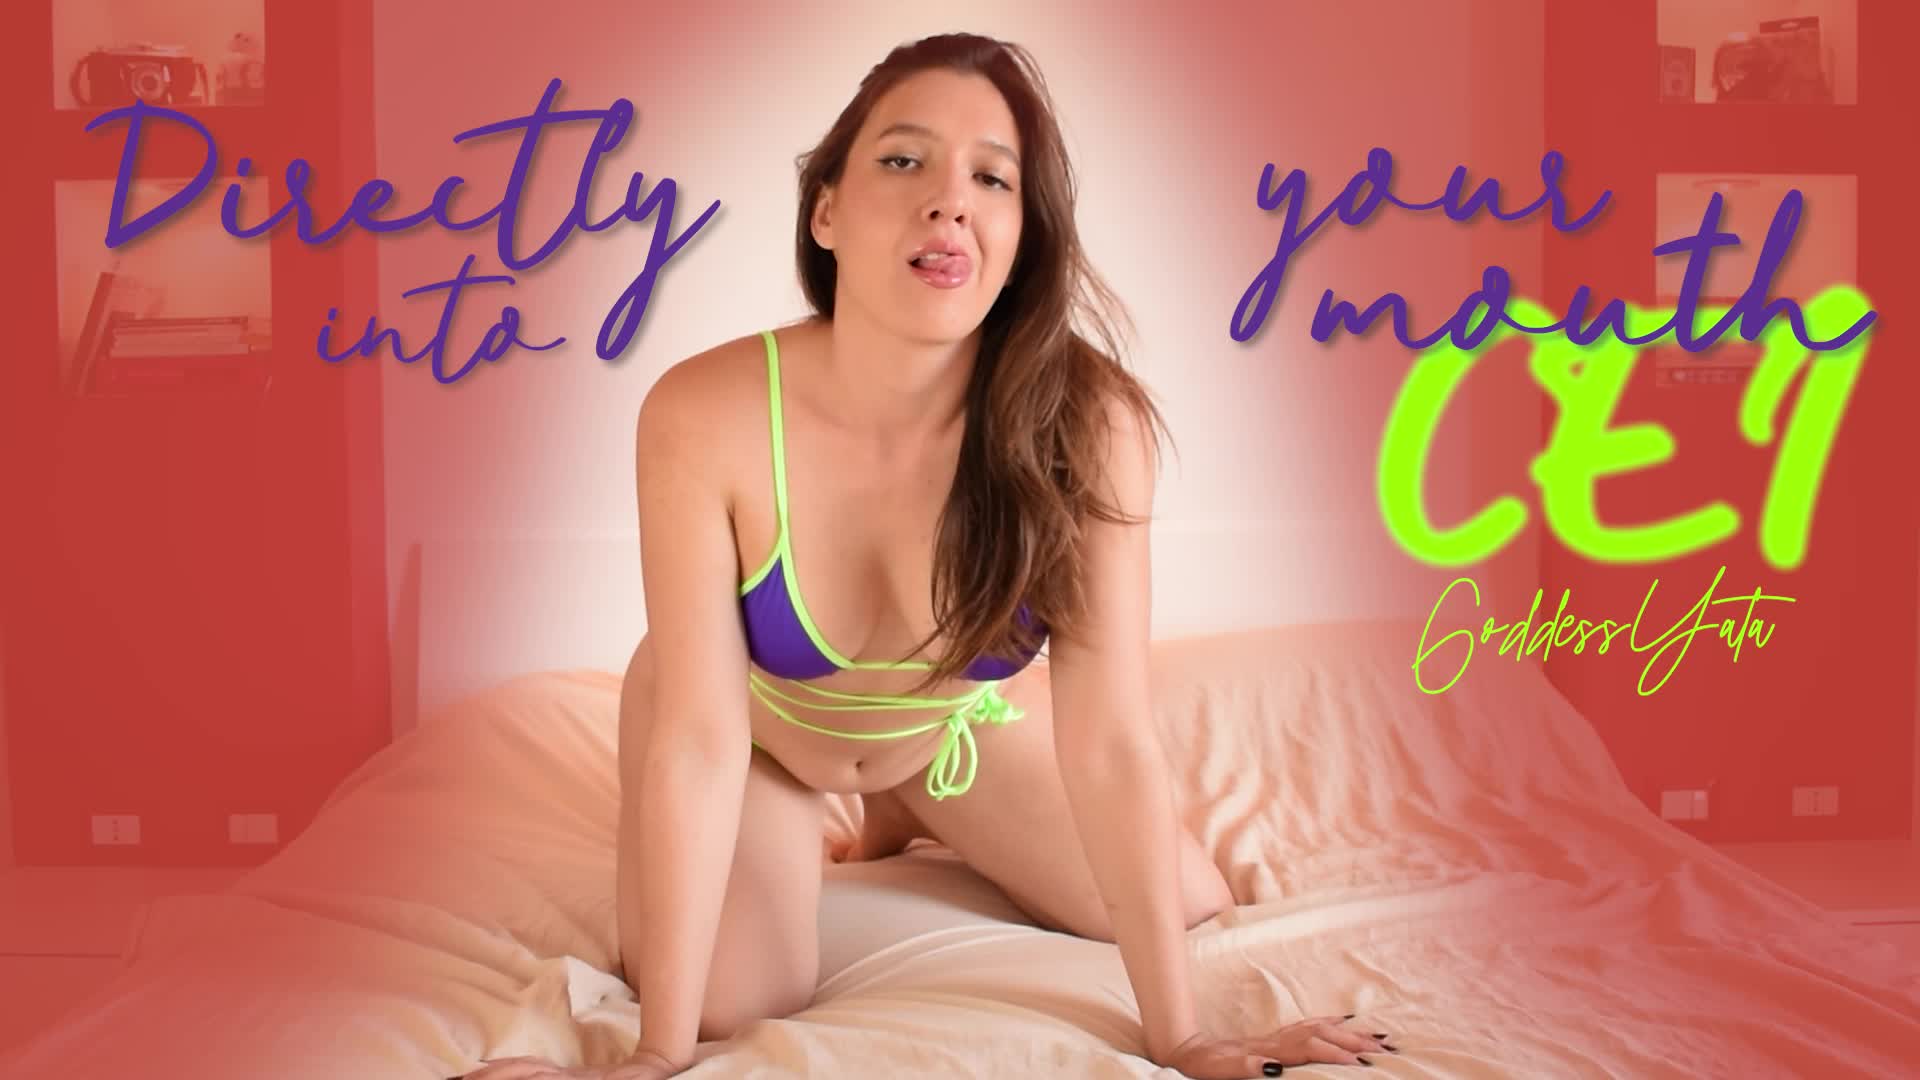 Cum Eating Instructions - Porn Video Clips For Sale at iWantClips